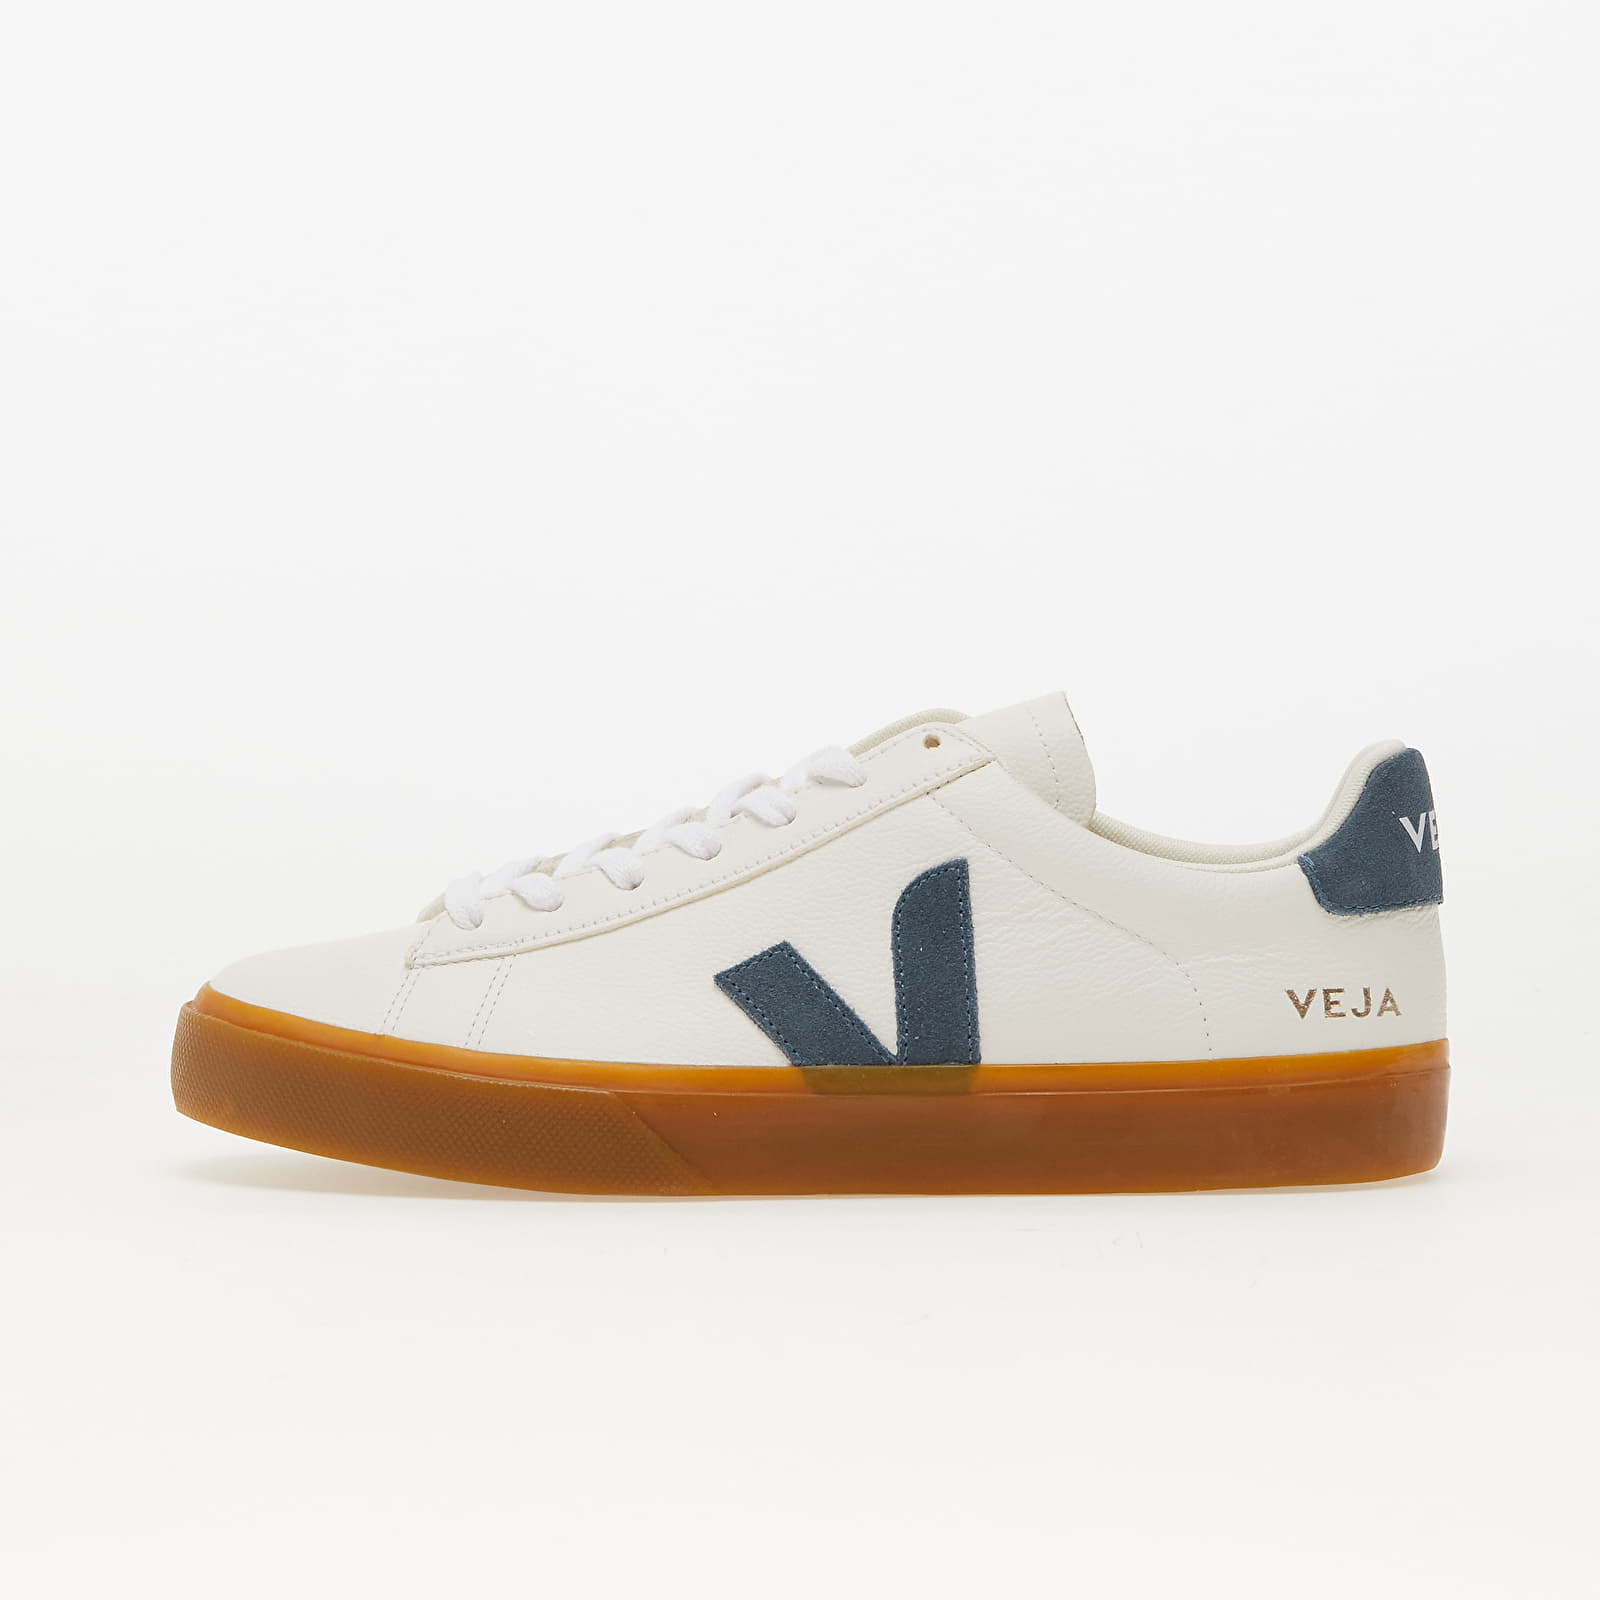 Men's sneakers and shoes Veja Campo Extra White/ California/ Natural